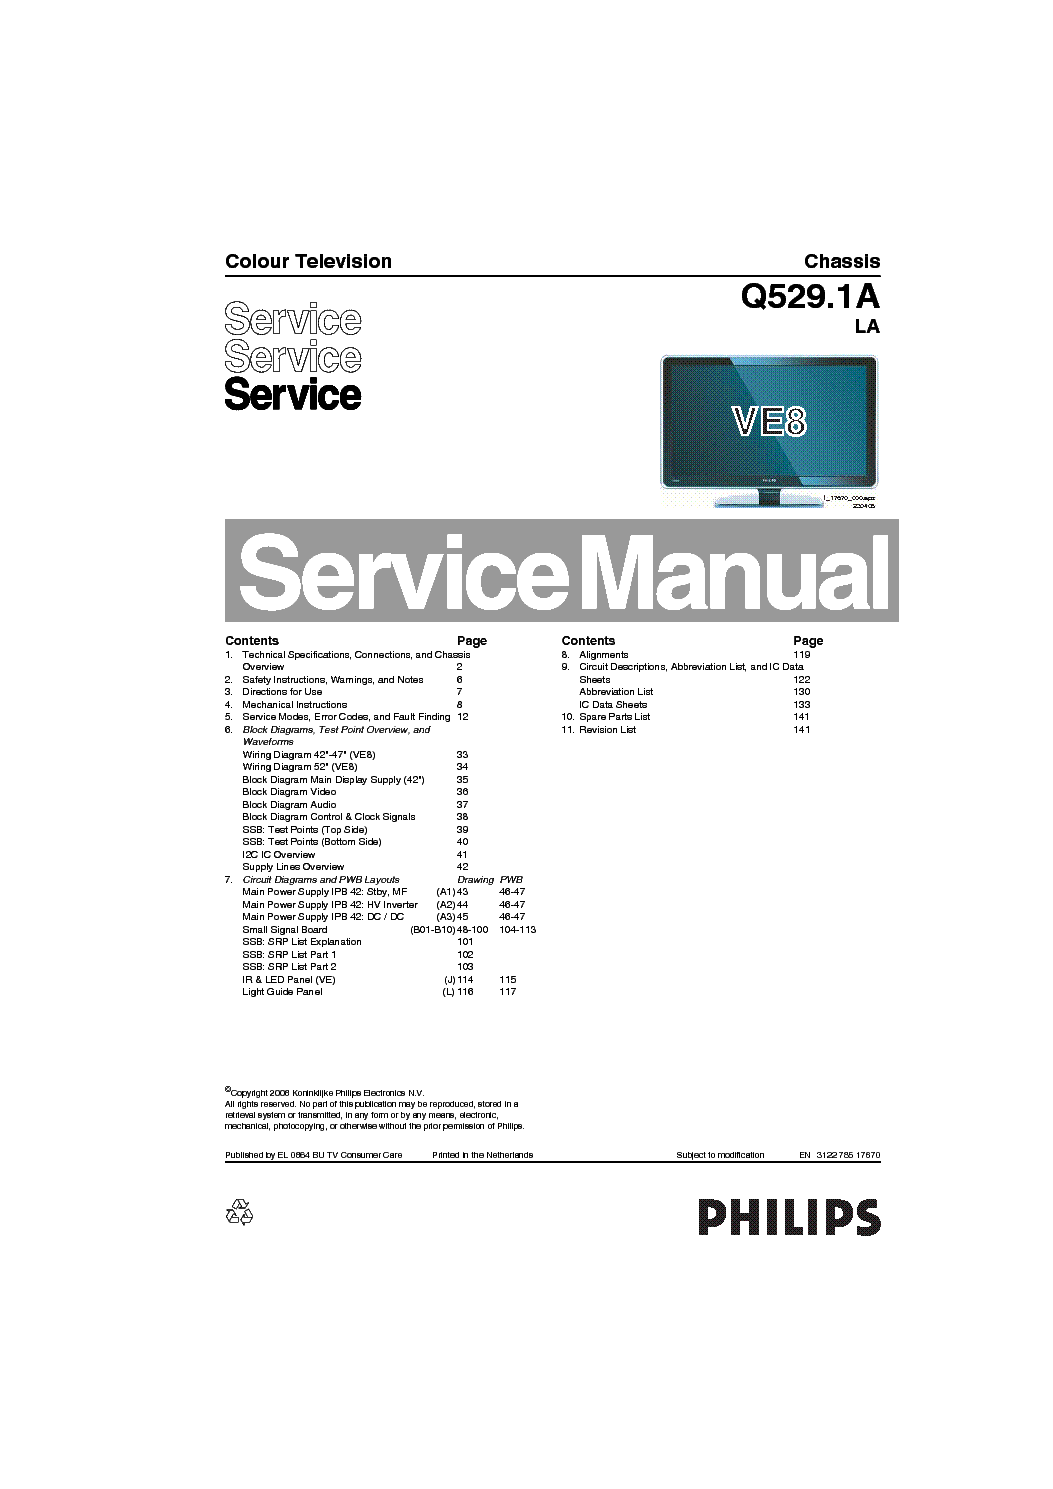 PHILIPS 42PFL9703 CHASSIS Q529.1A LA SM service manual (1st page)